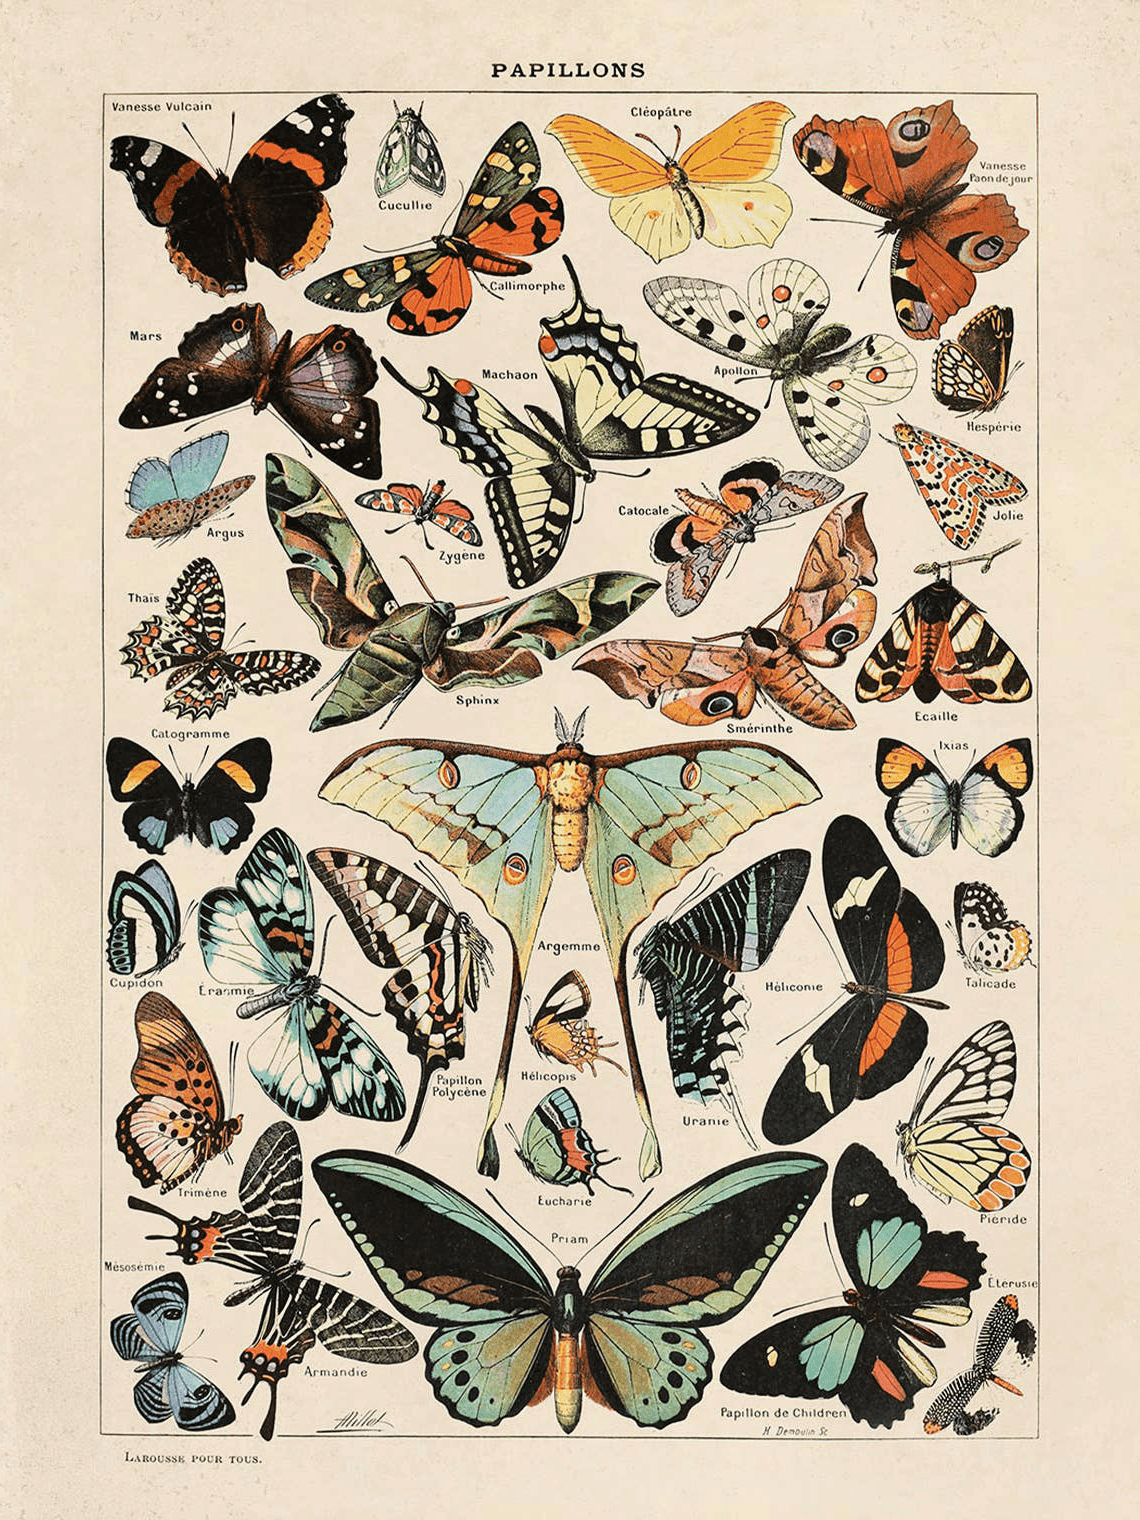 Curious Prints Giclee Print 11x14" (Unframed) Vintage Millot Butterfly No.2 Print